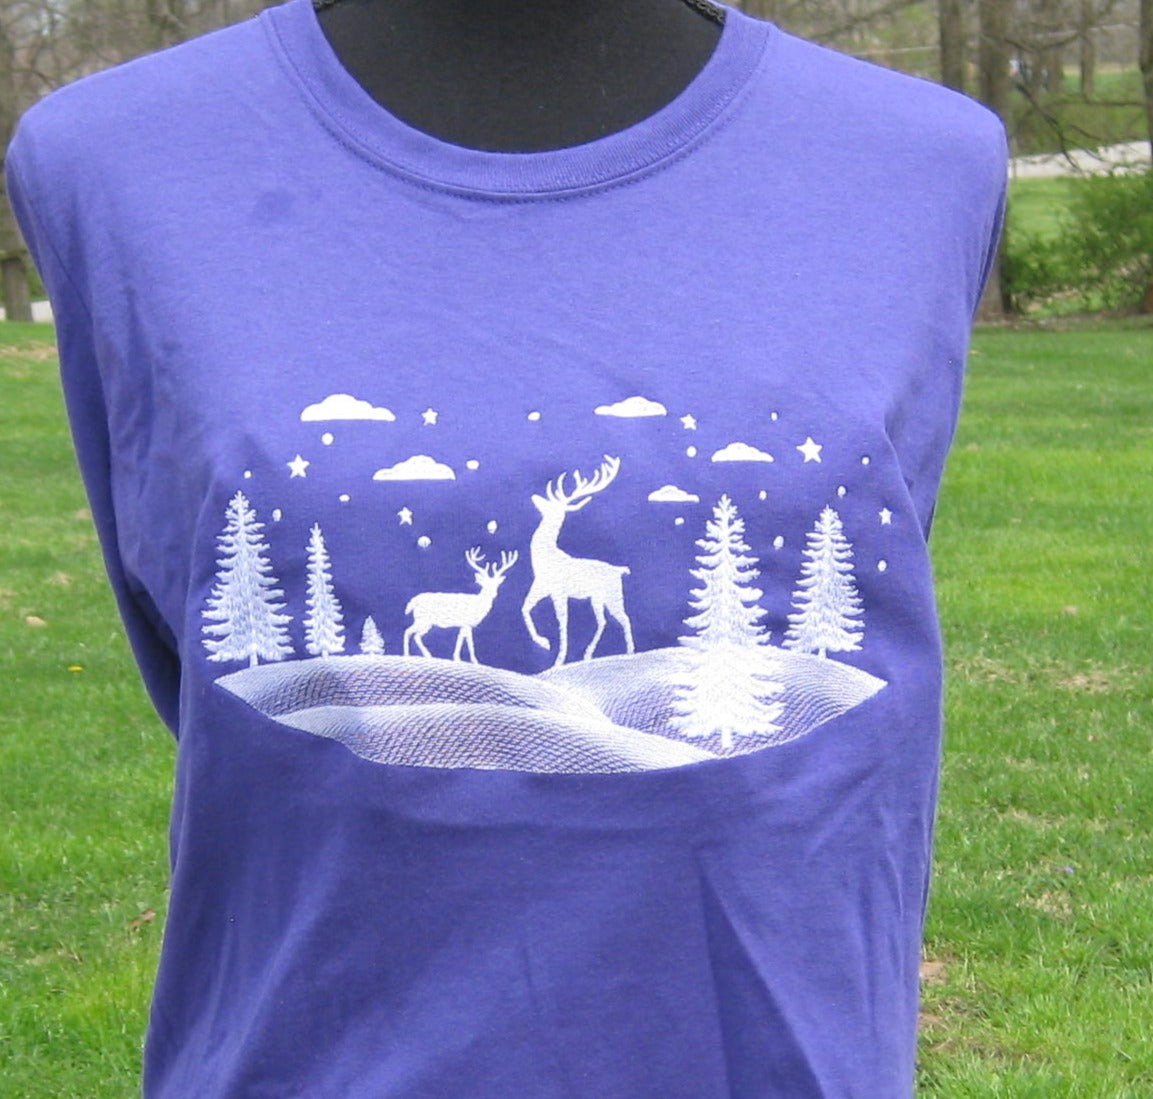 Winter Deer Scene with Ties t-shirt sleeve – Stitched Family long